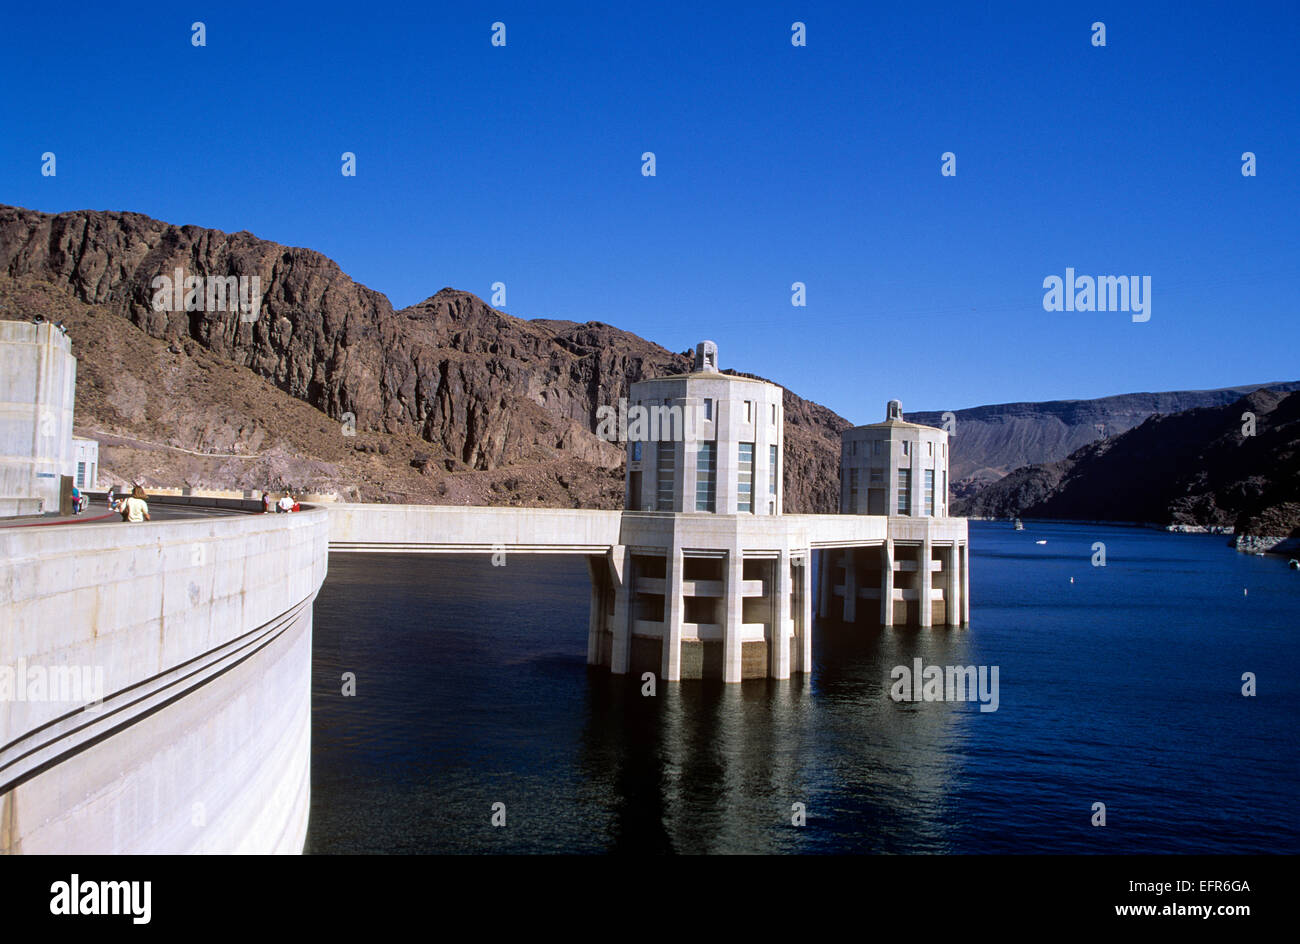 Hoover Dam, Lake Mead, Nevada, USA. Banque D'Images